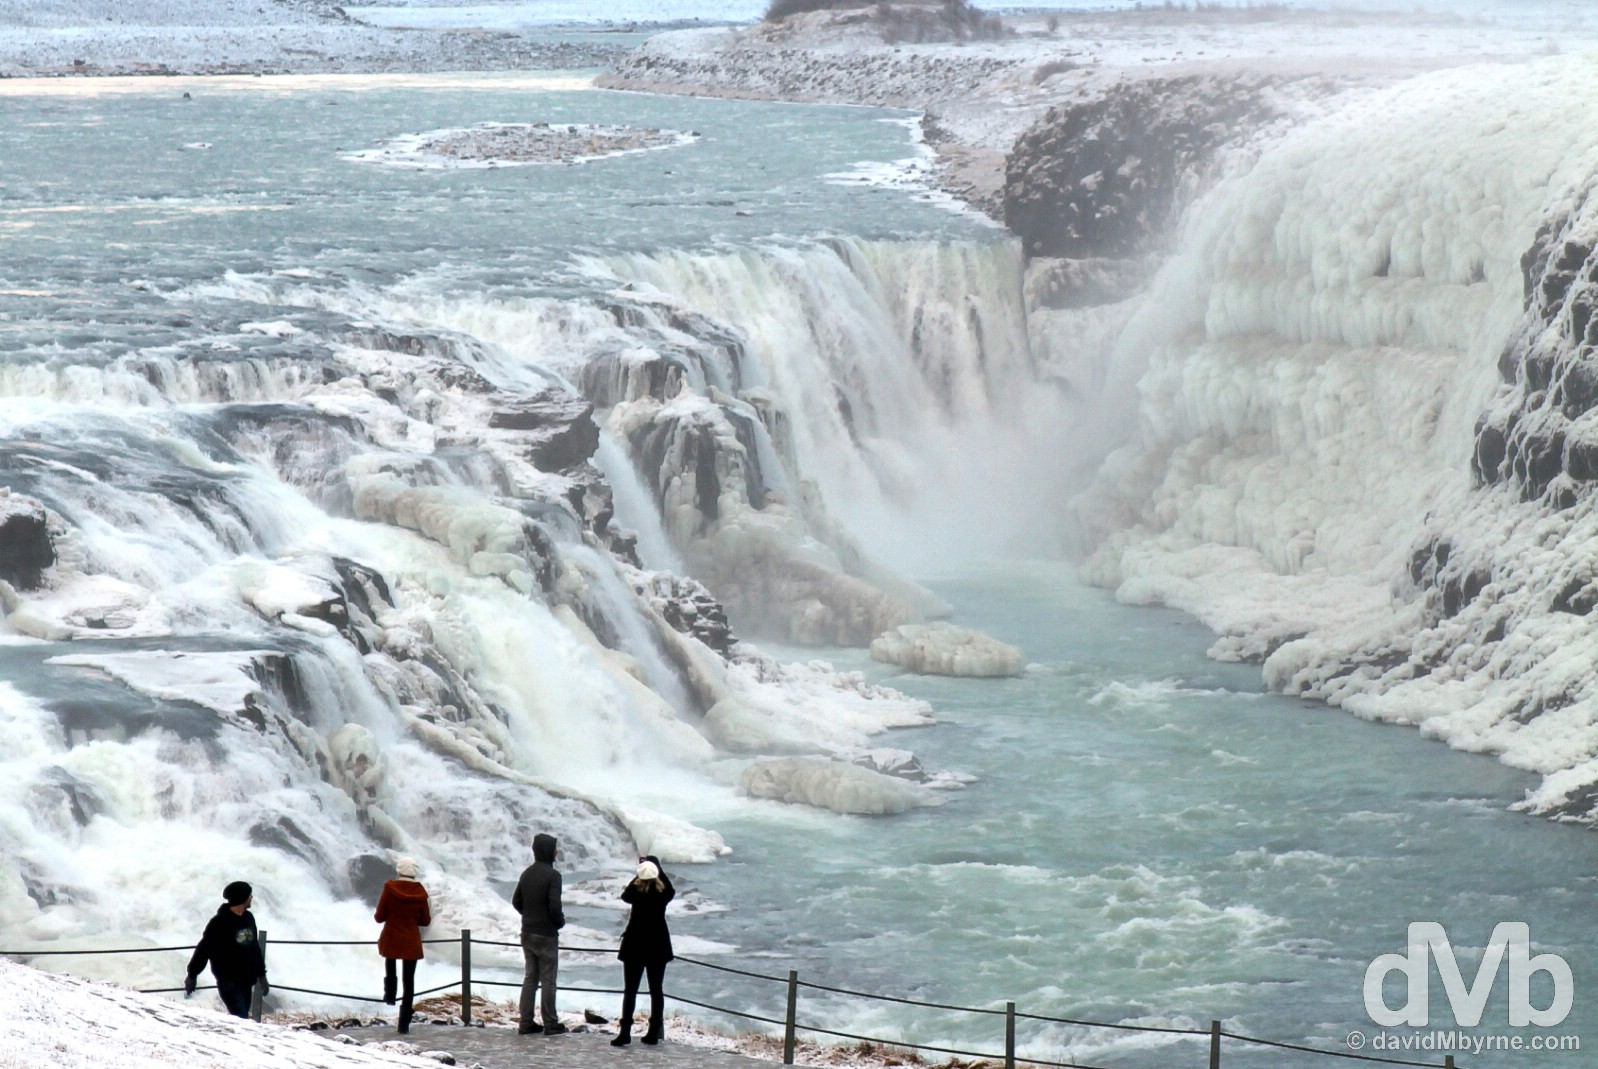 Overlooking the Gullfoss waterfall in south west Iceland. December 3, 2012. 